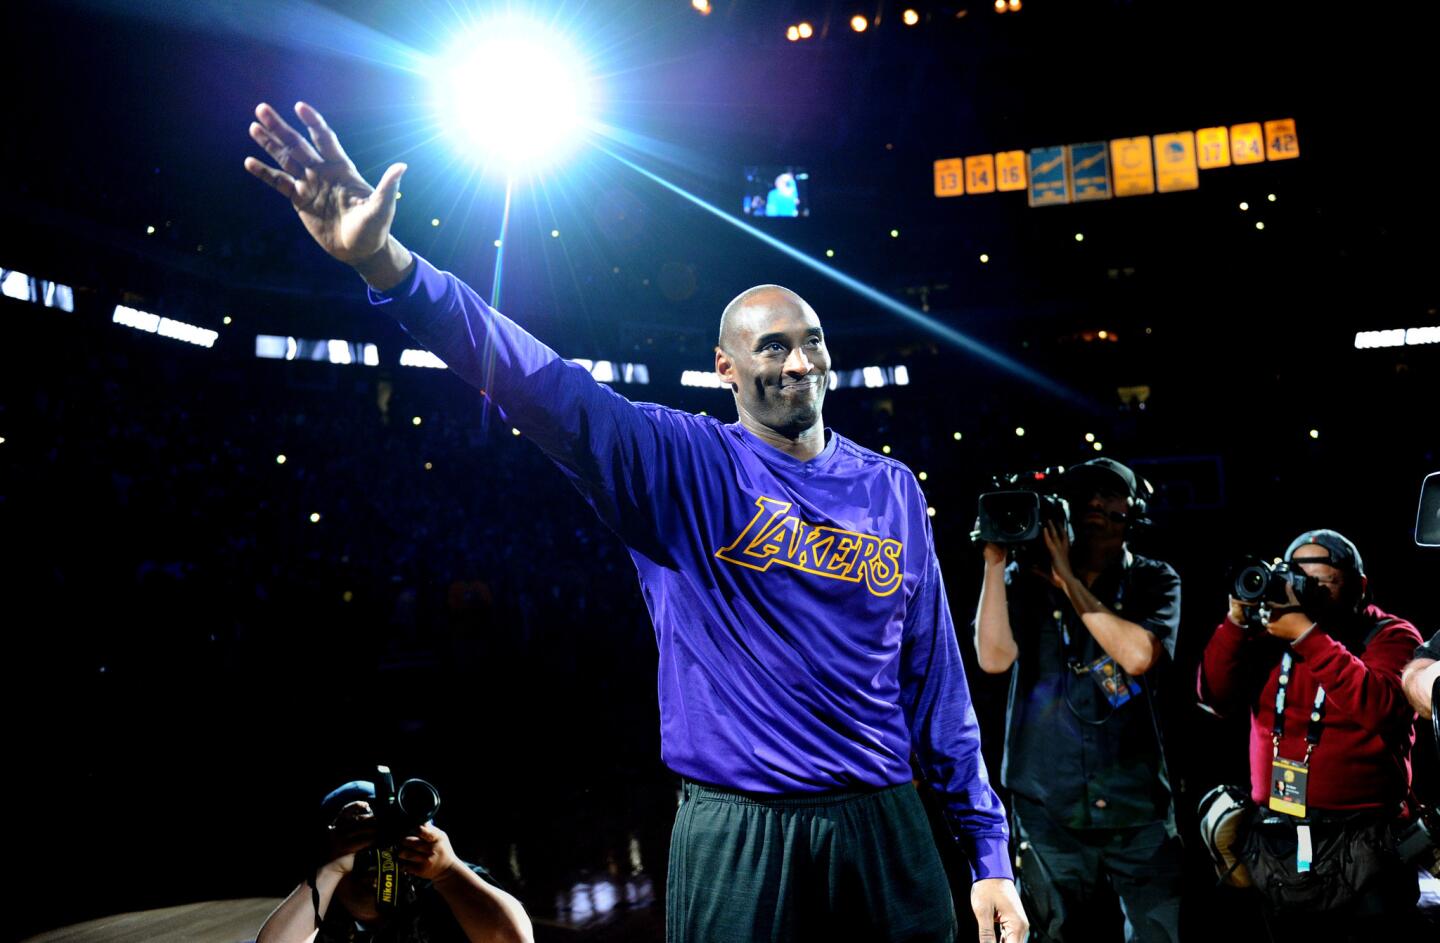 Kobe Bryant waves to the crowd at Oracle Arena while being introduced before the Lakers playedthe Warriors on Jan. 14, 2016.